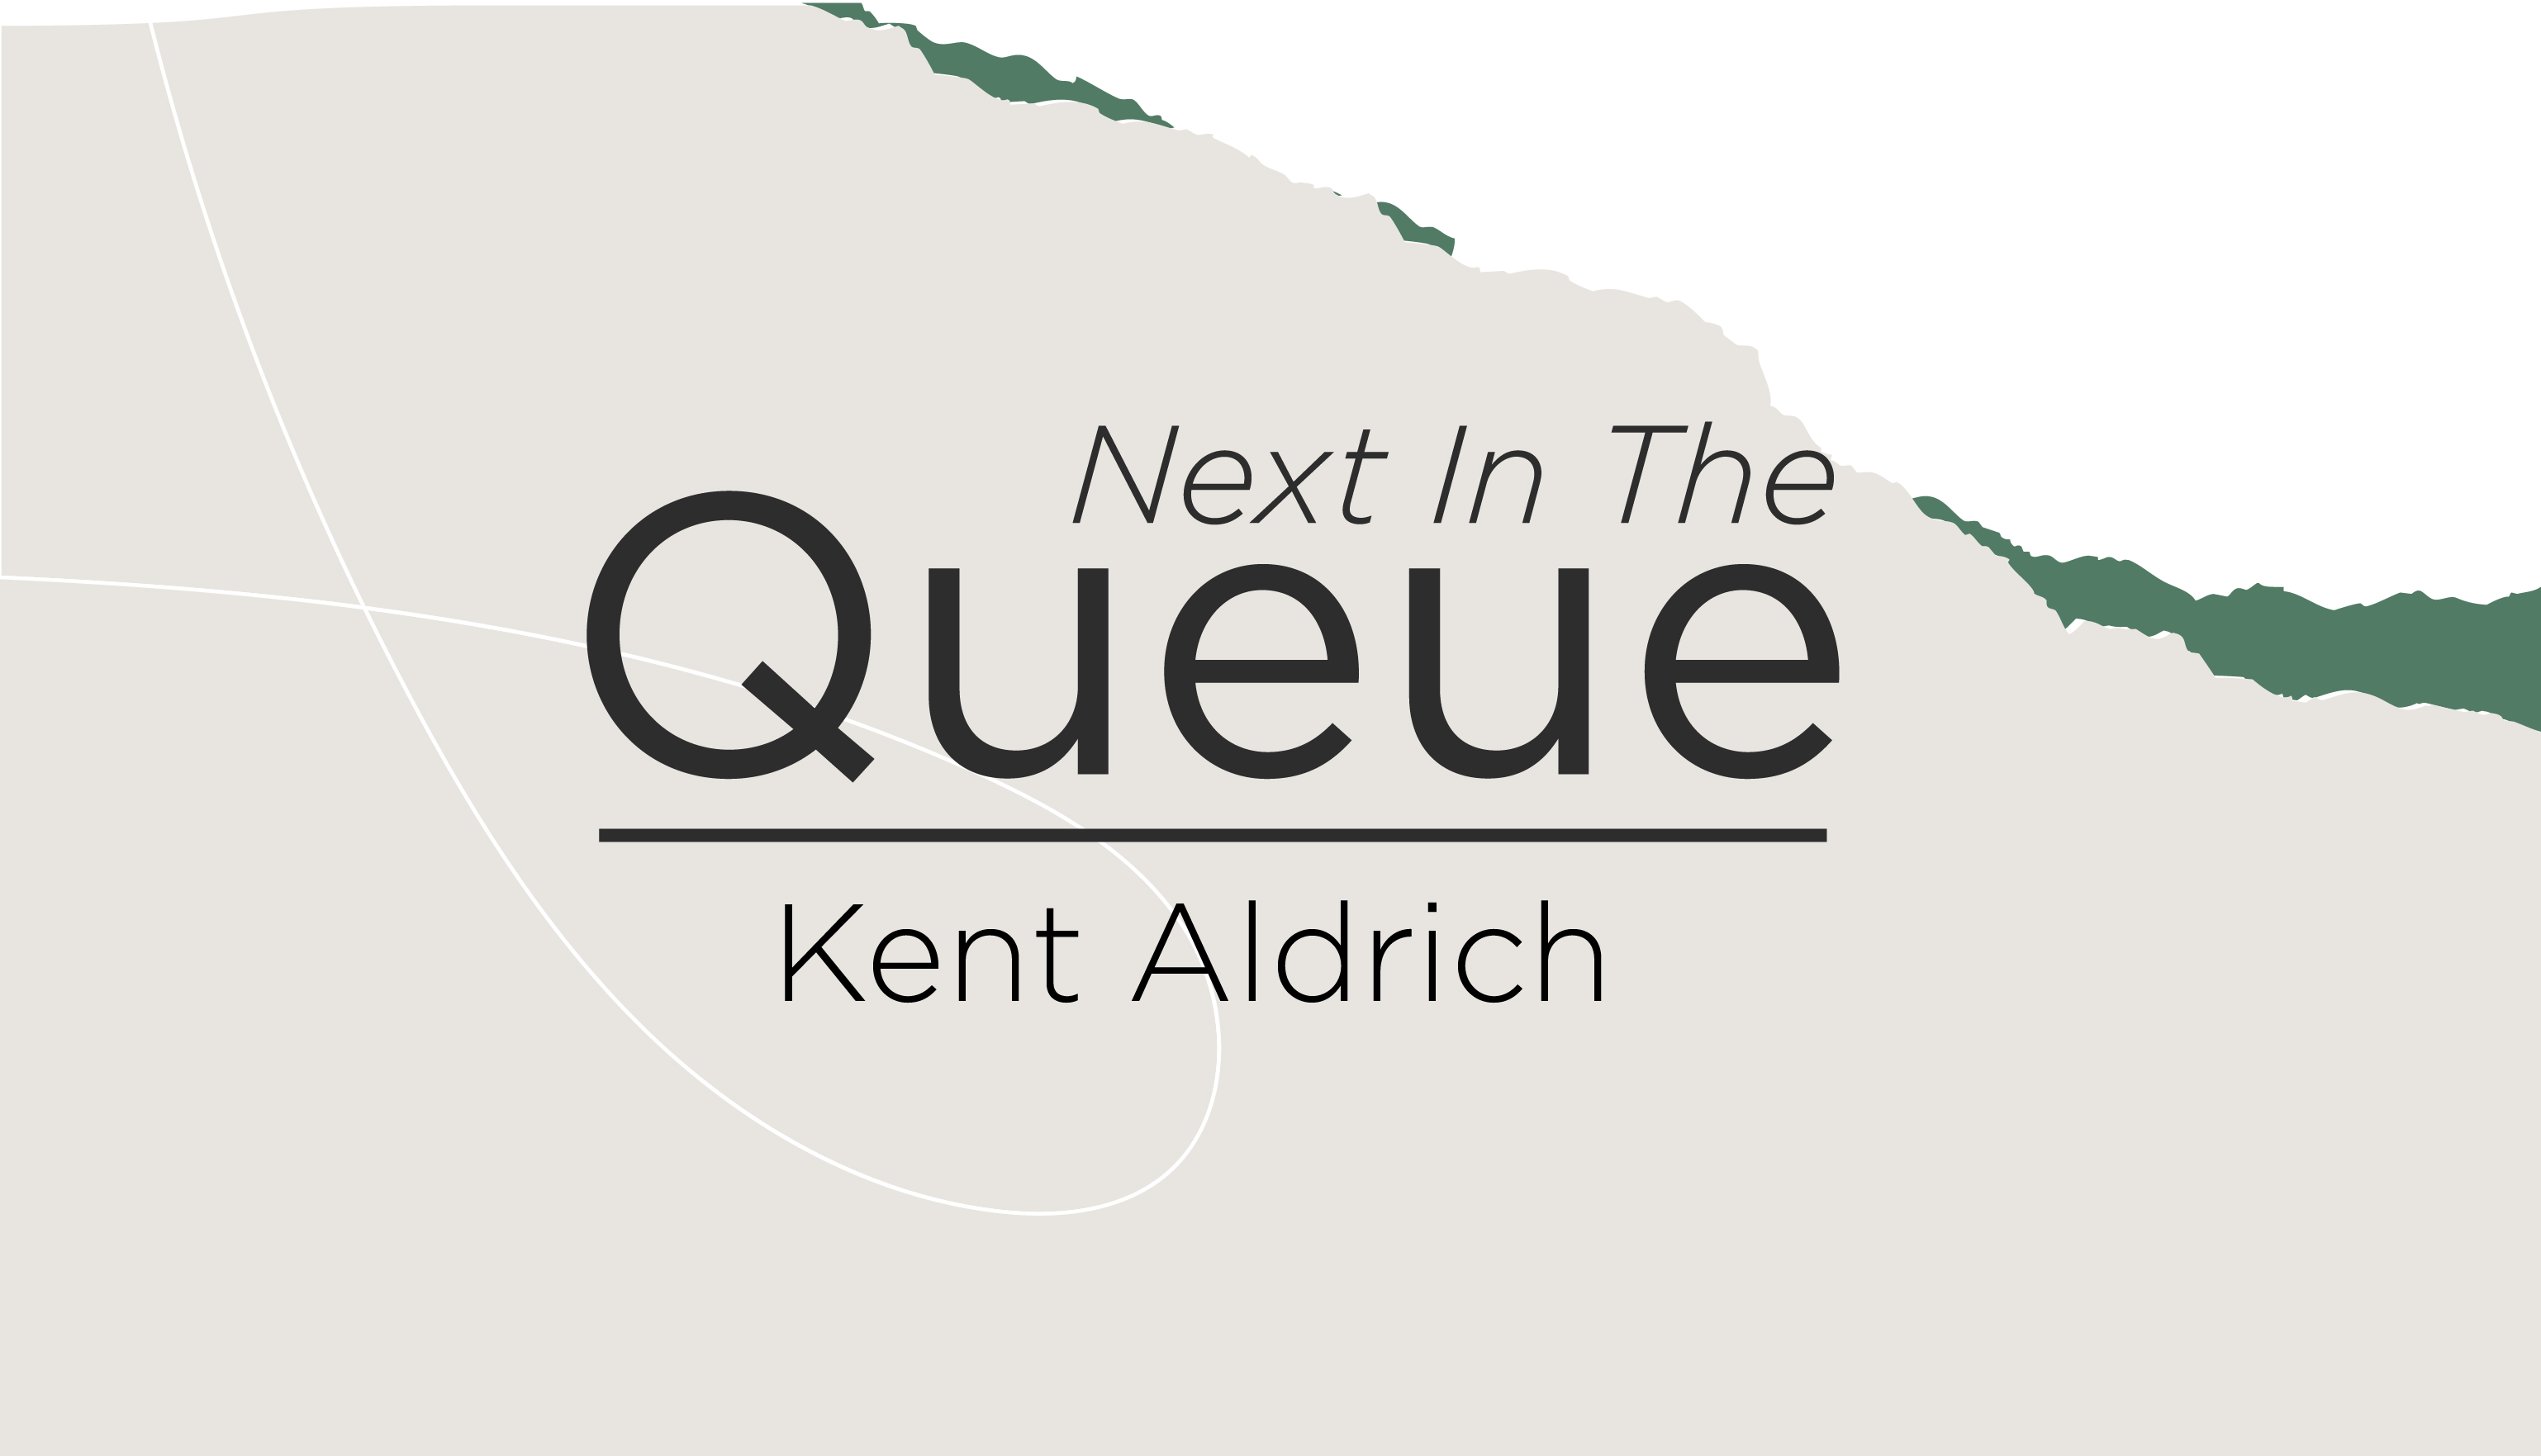 blog post cover graphic for The Queue featuring Kent Aldrich